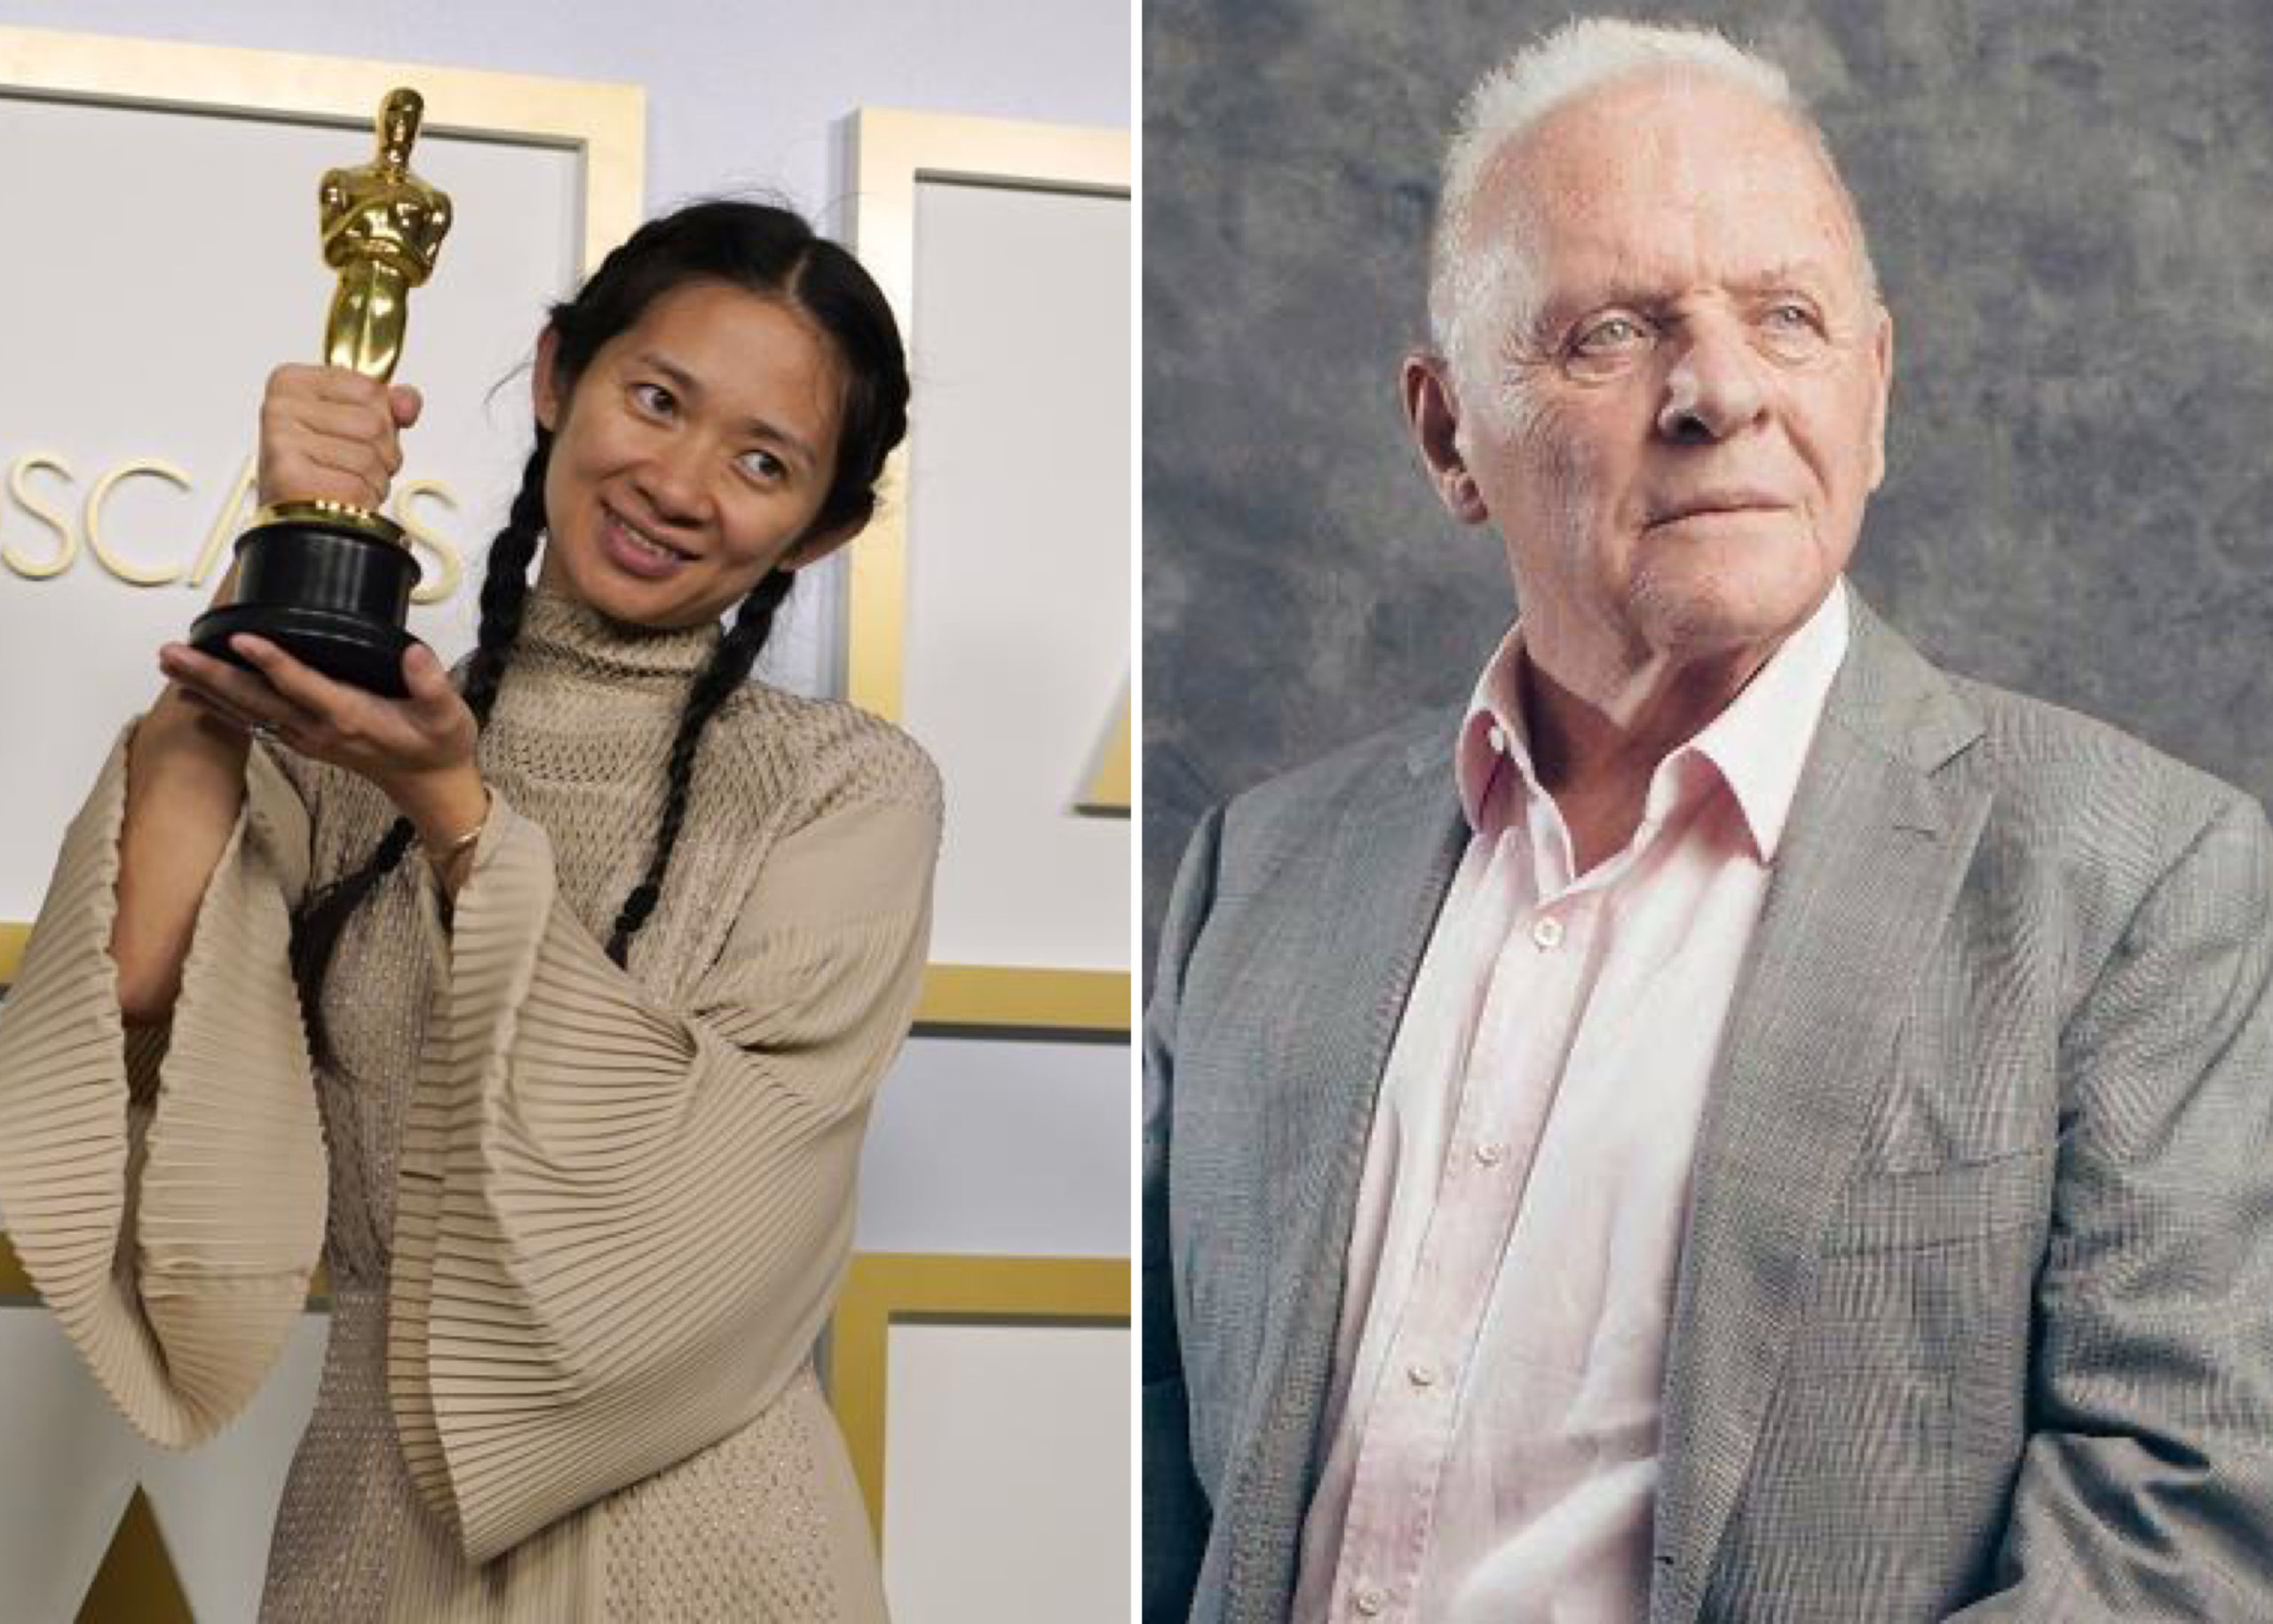 Chloé Zhao’s won the Oscar for best director for “Nomadland,” becoming just the second woman and the first woman of color to win the award, while Anthony Hopkins Wins Best Actor Over Chadwick Boseman.